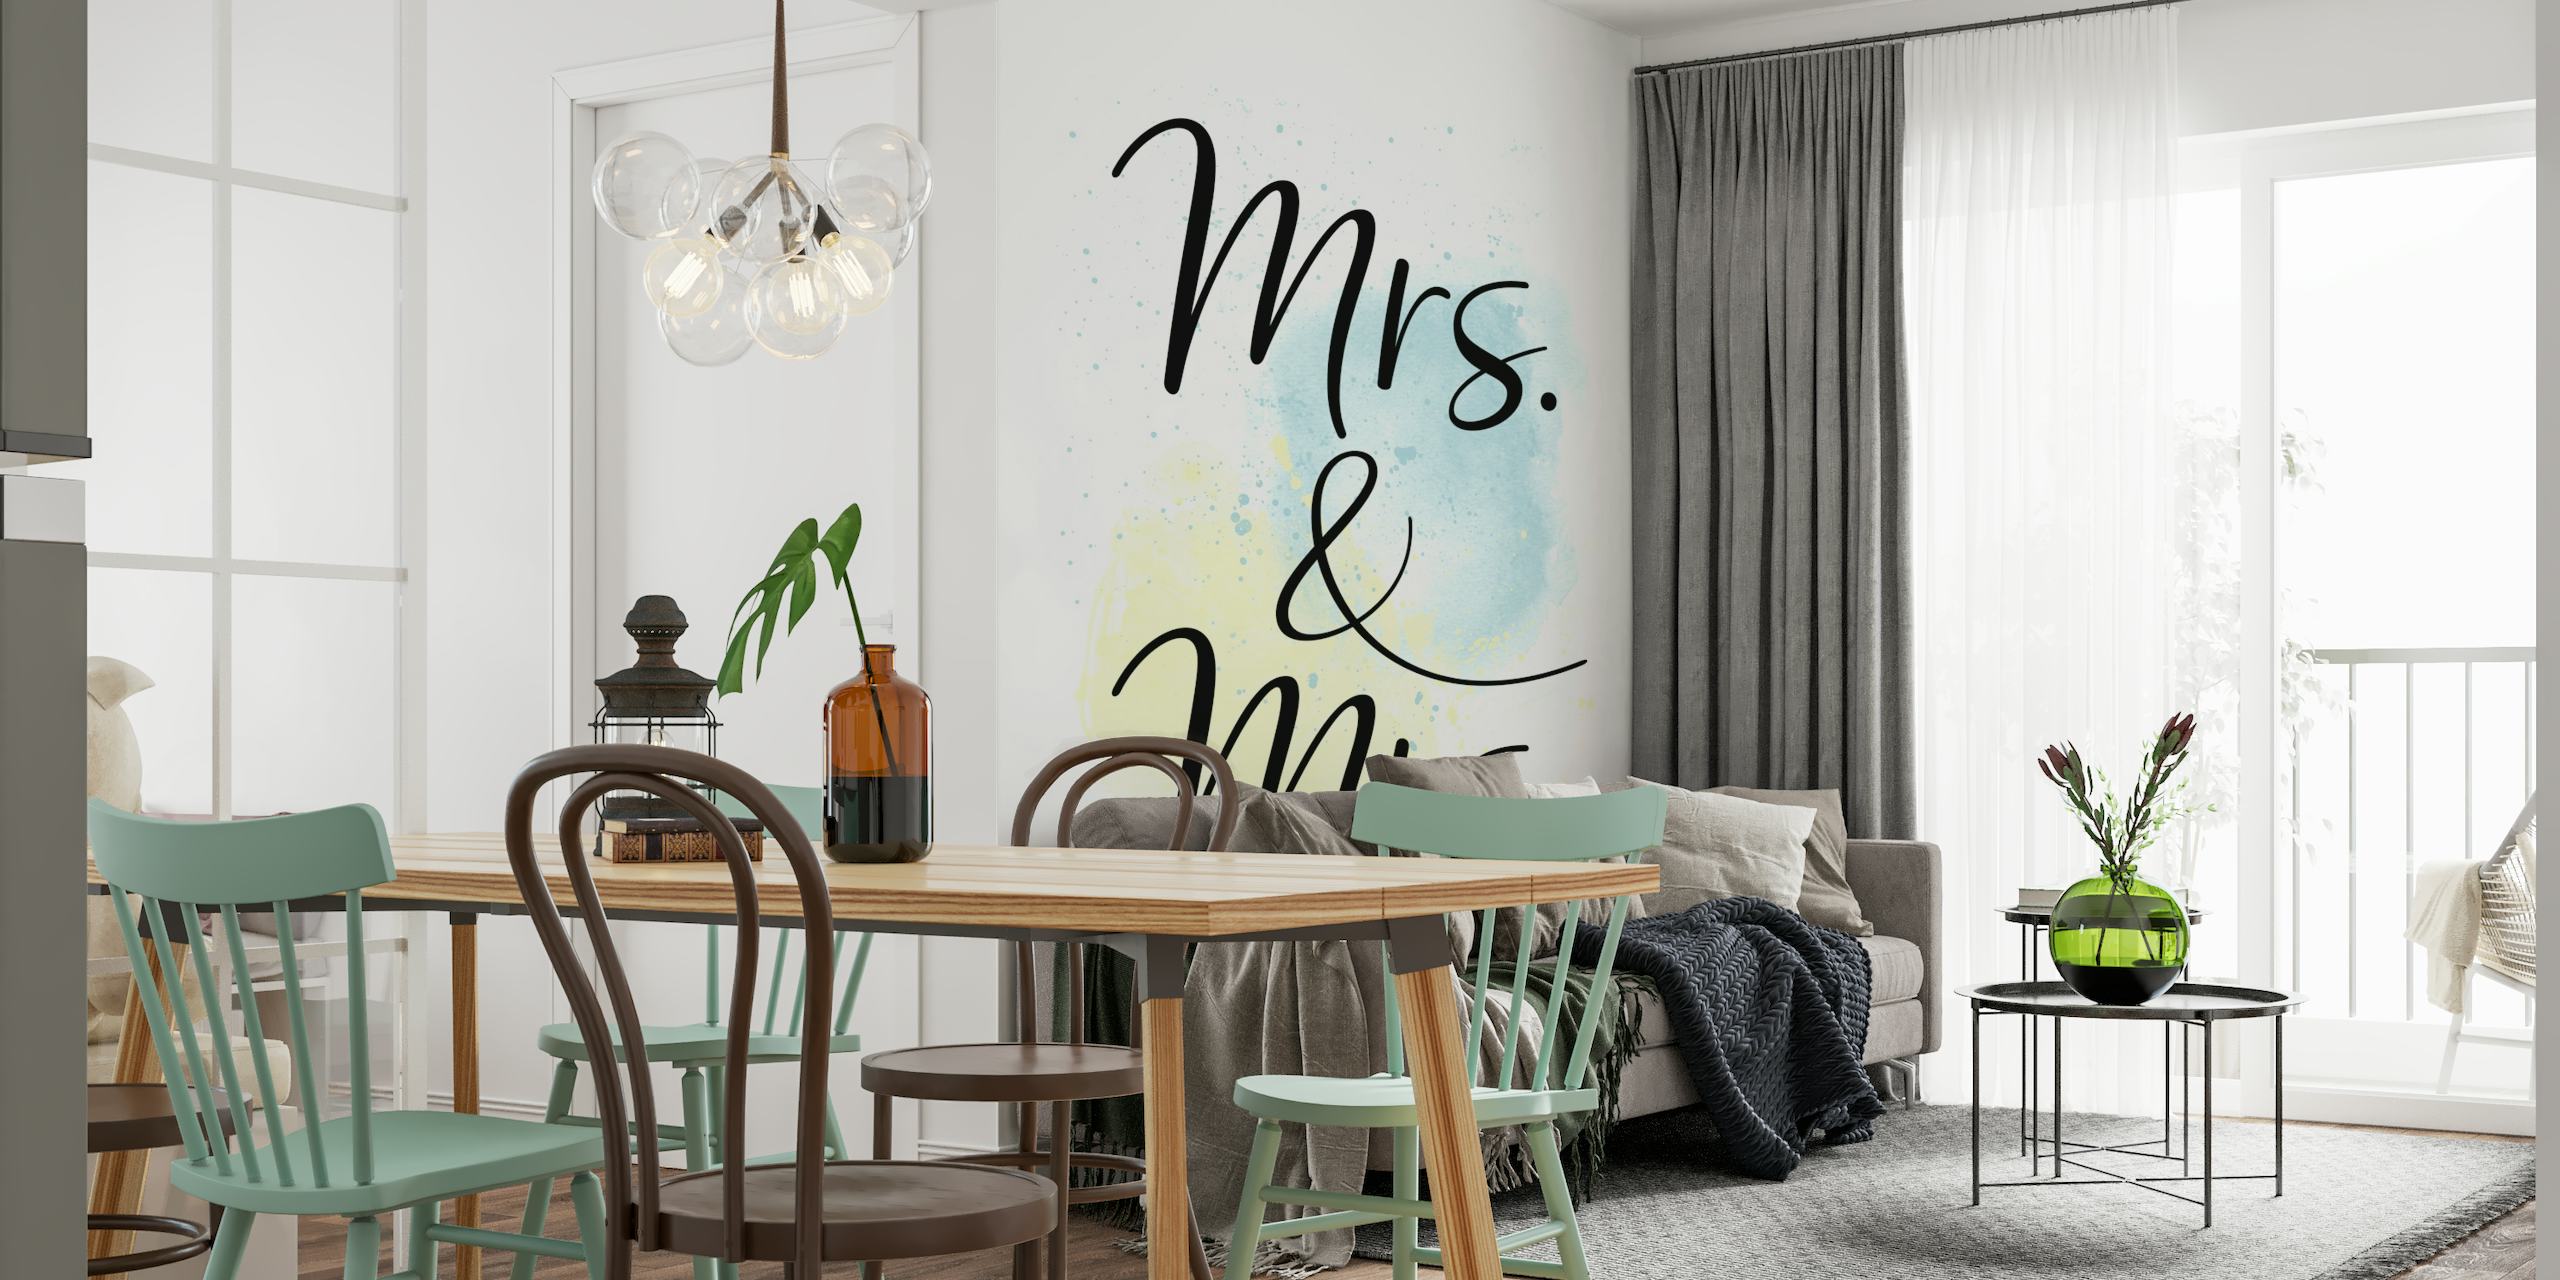 Mrs and Mrs wallpaper